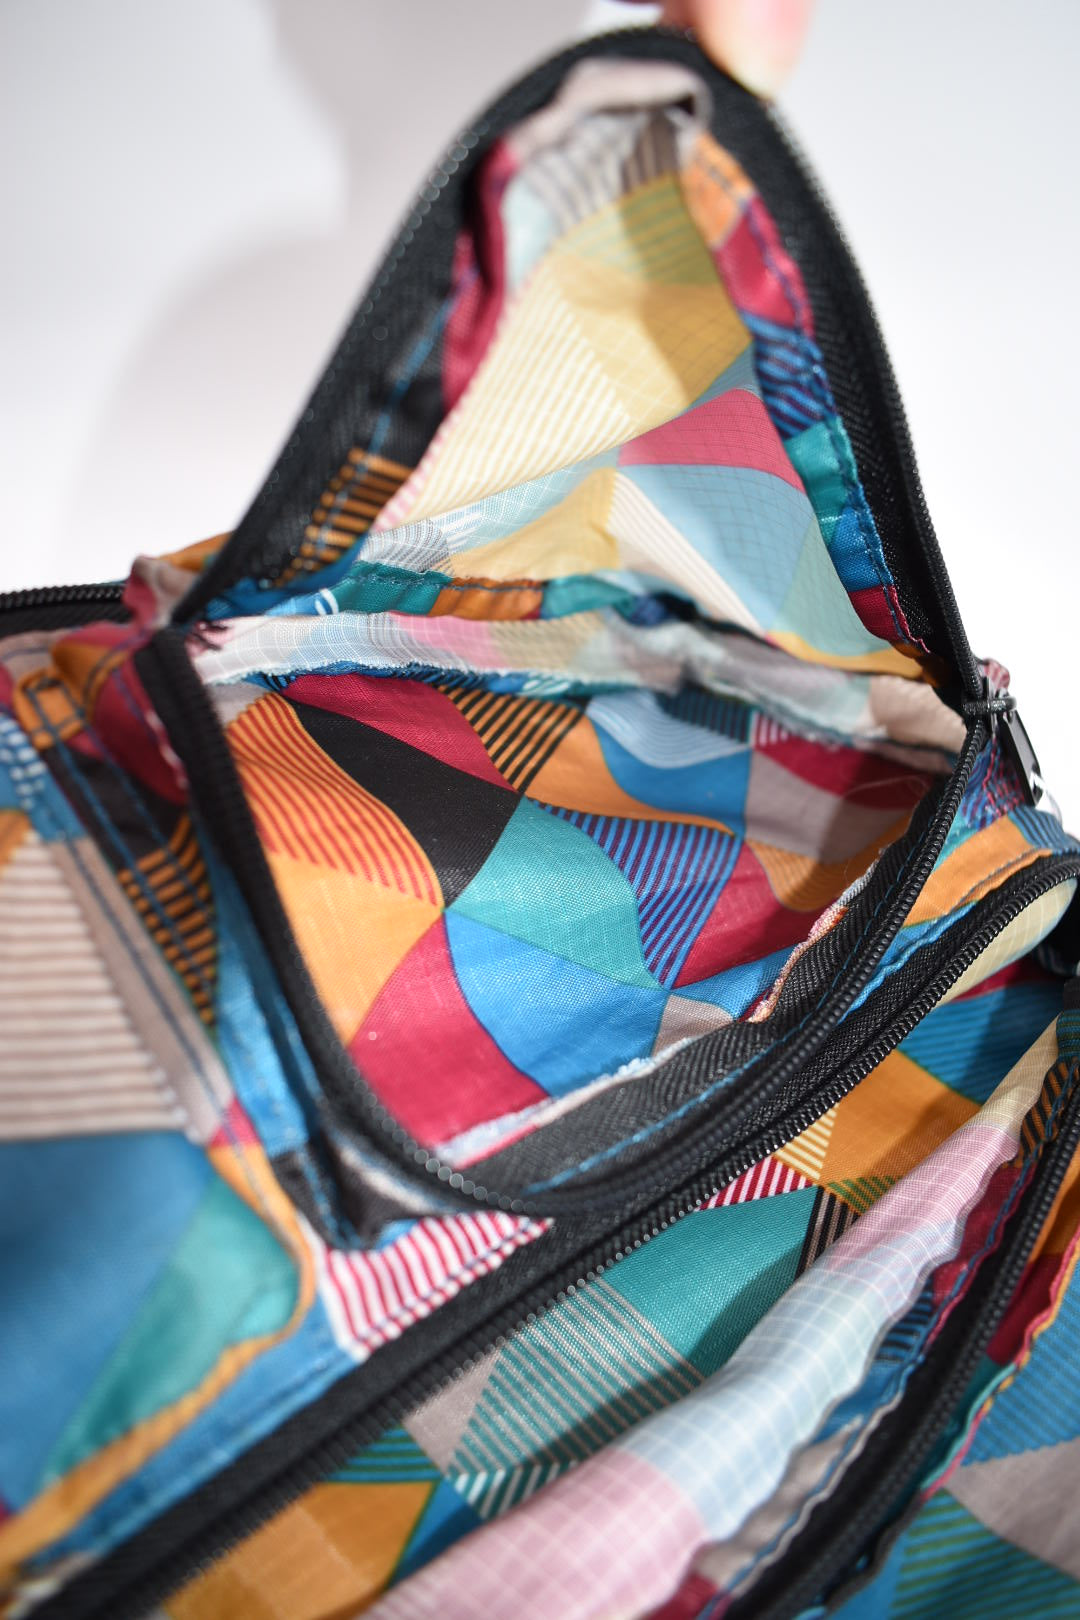 Kavu Nylon Rope Sack in Stained Glass